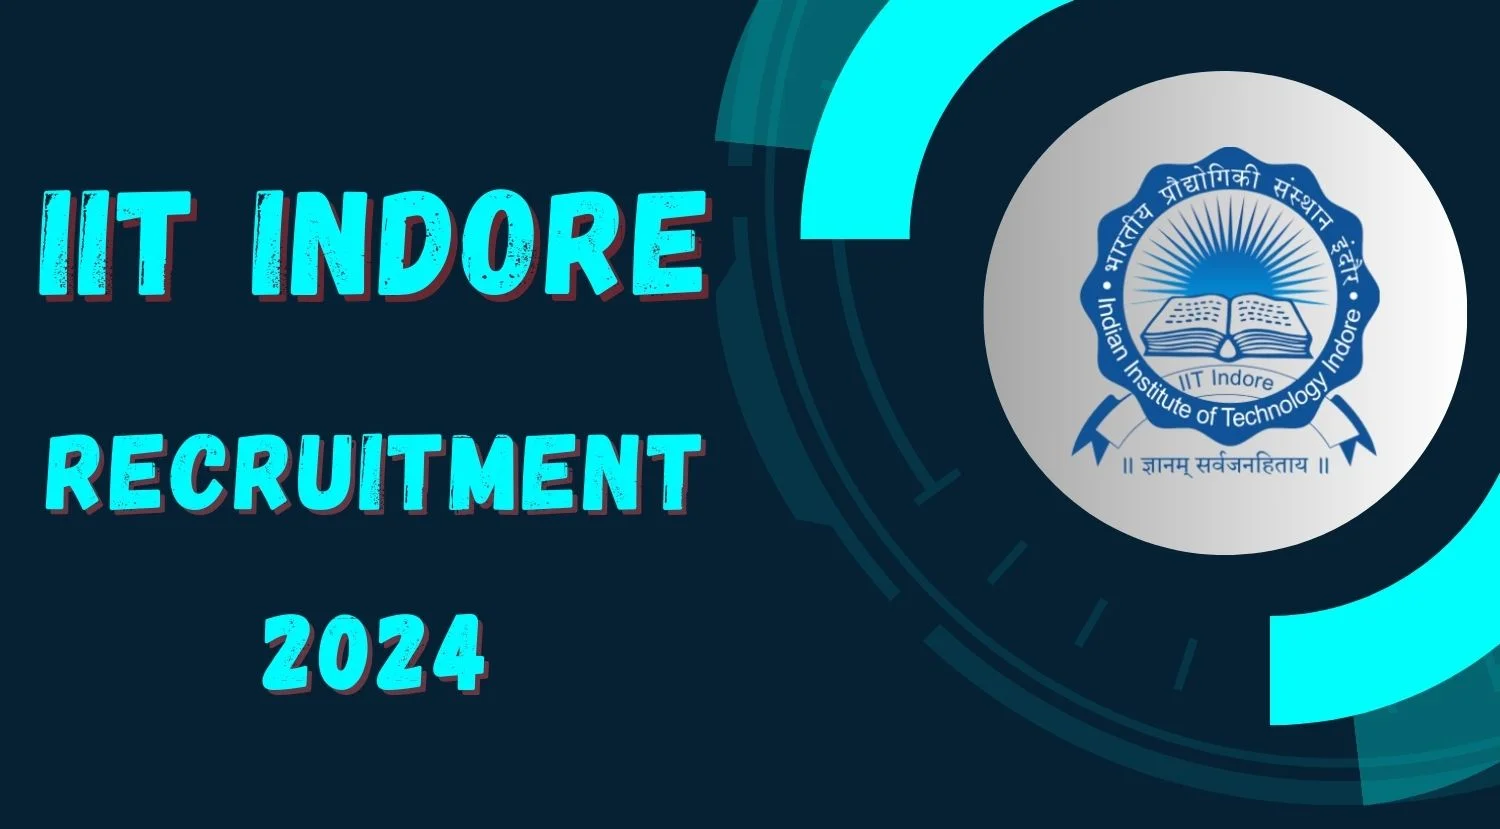 IIT Indore Research Assistant-1 Recruitment 2024